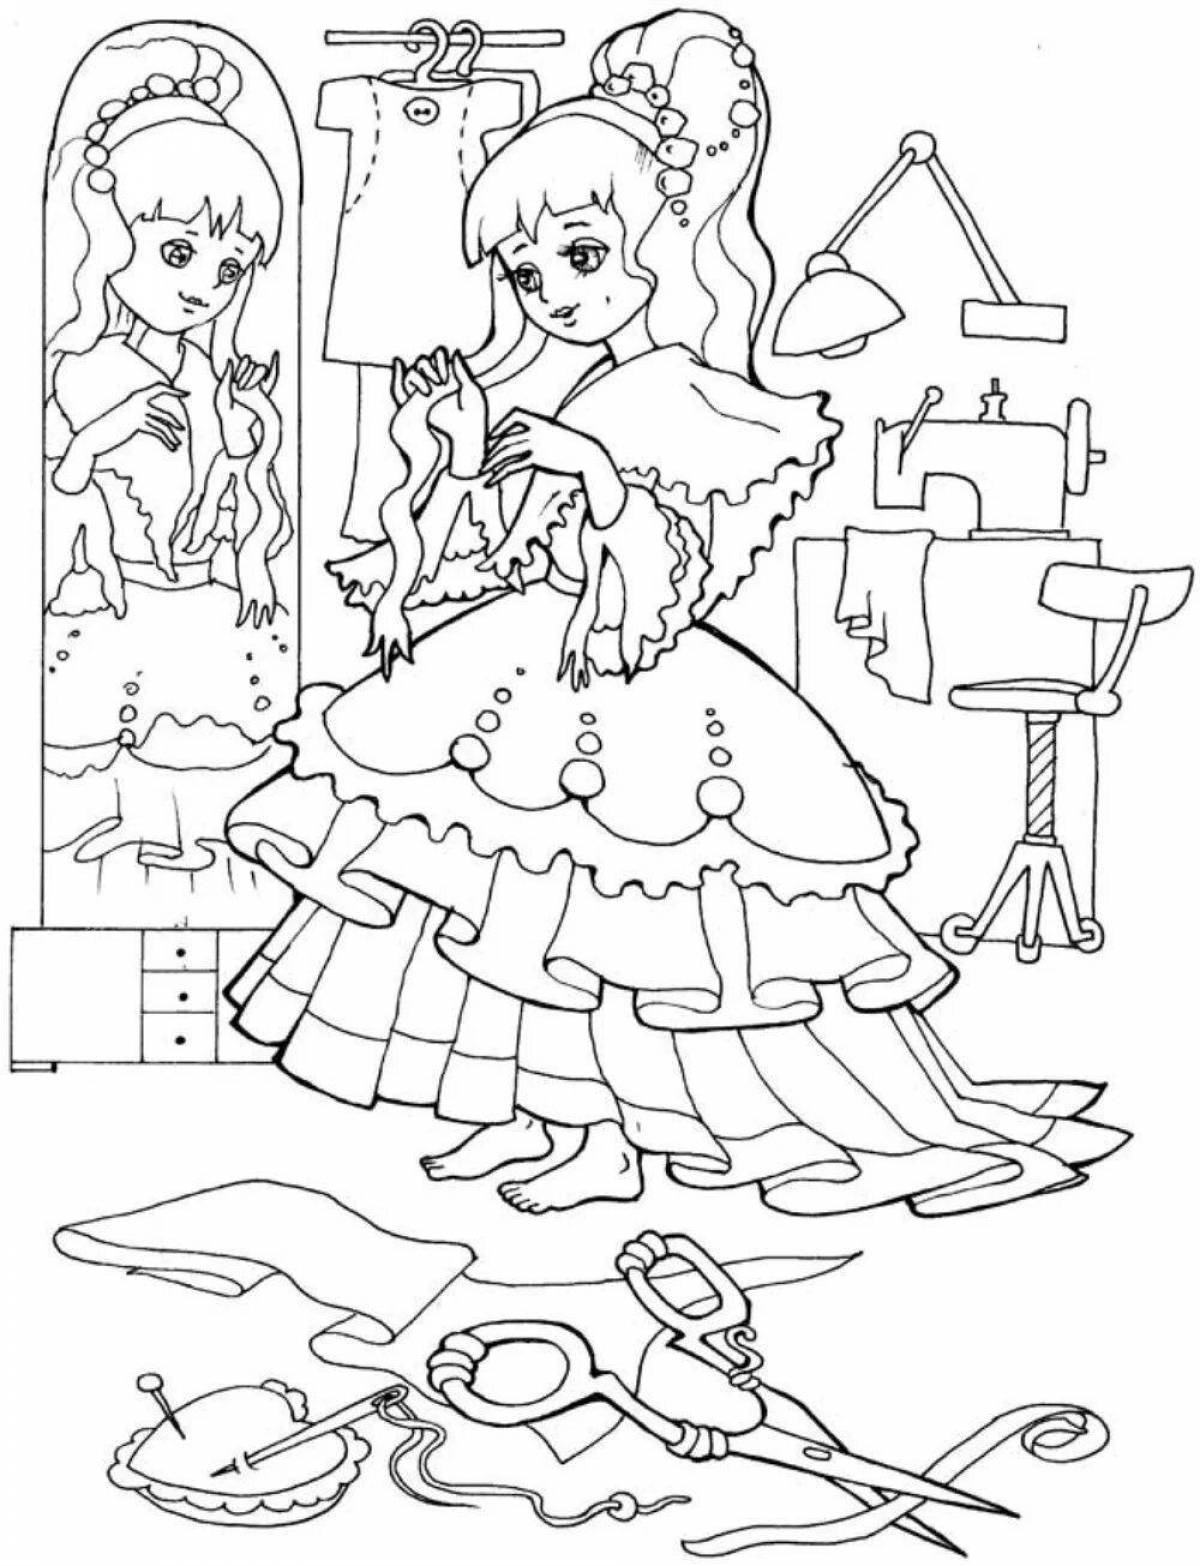 Color-frenzy coloring page for 9 year old girls